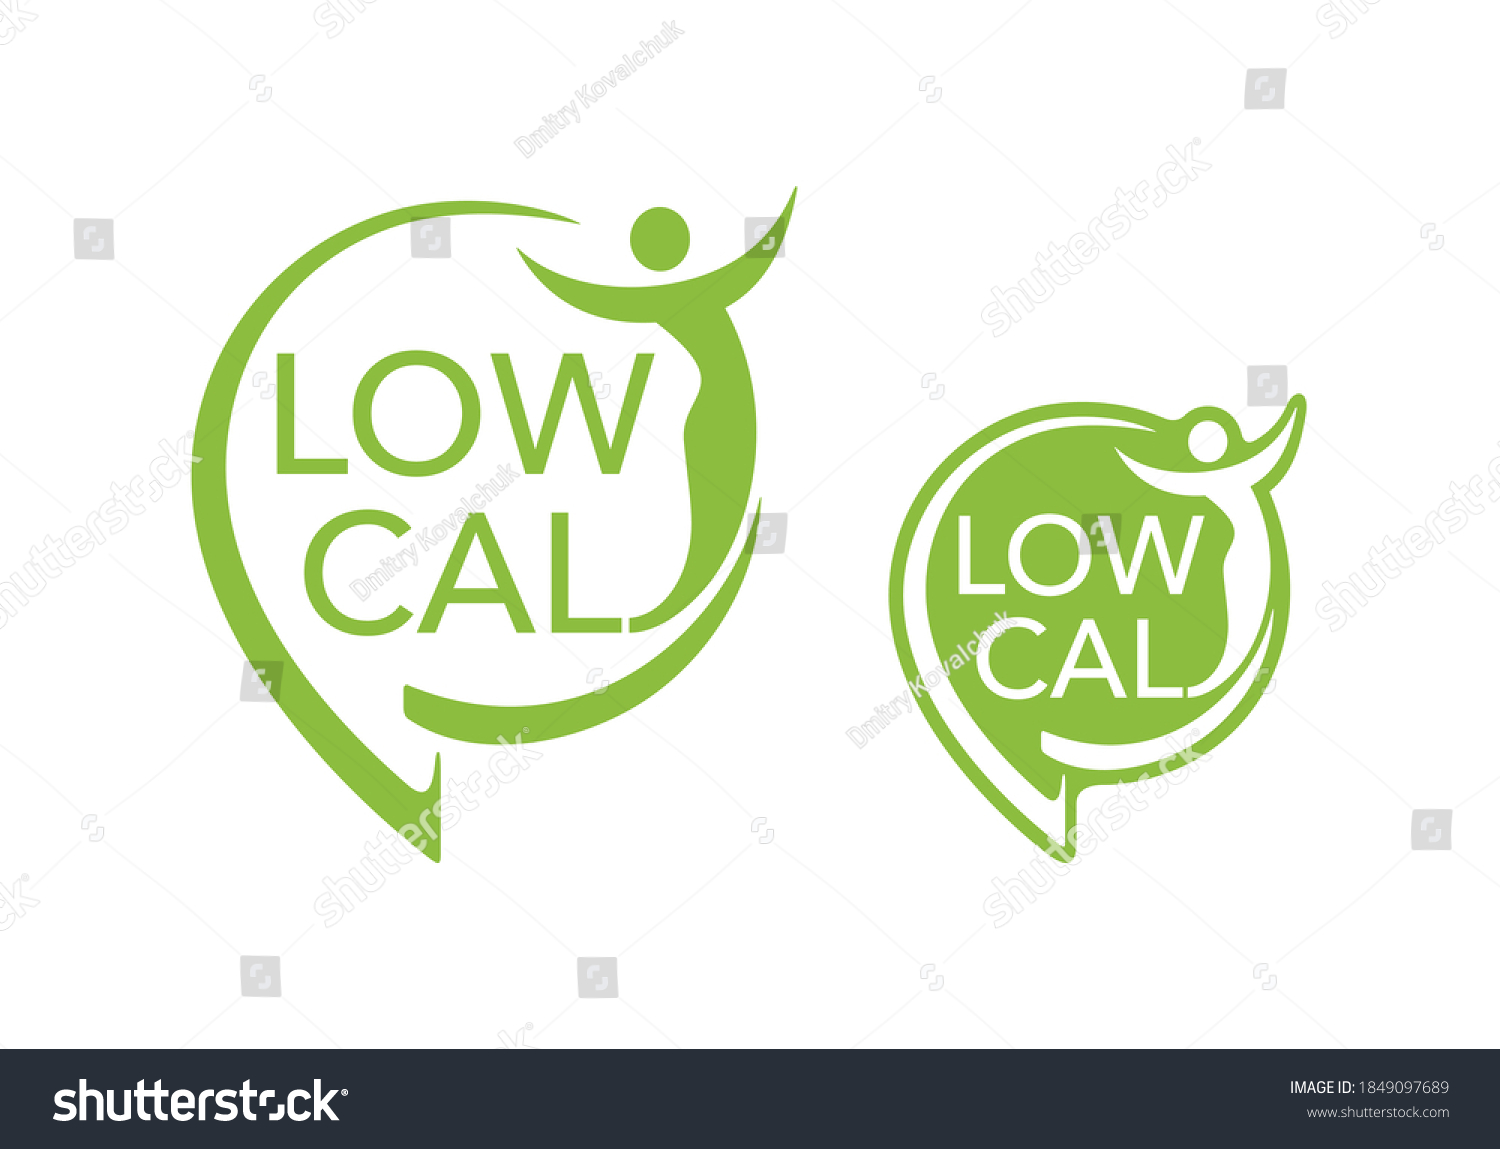 SVG of Low Cal stamp - combination of pin mark and abstract woman silhouette - pictogram for dietary low-cal food products - isolated vector emblem svg